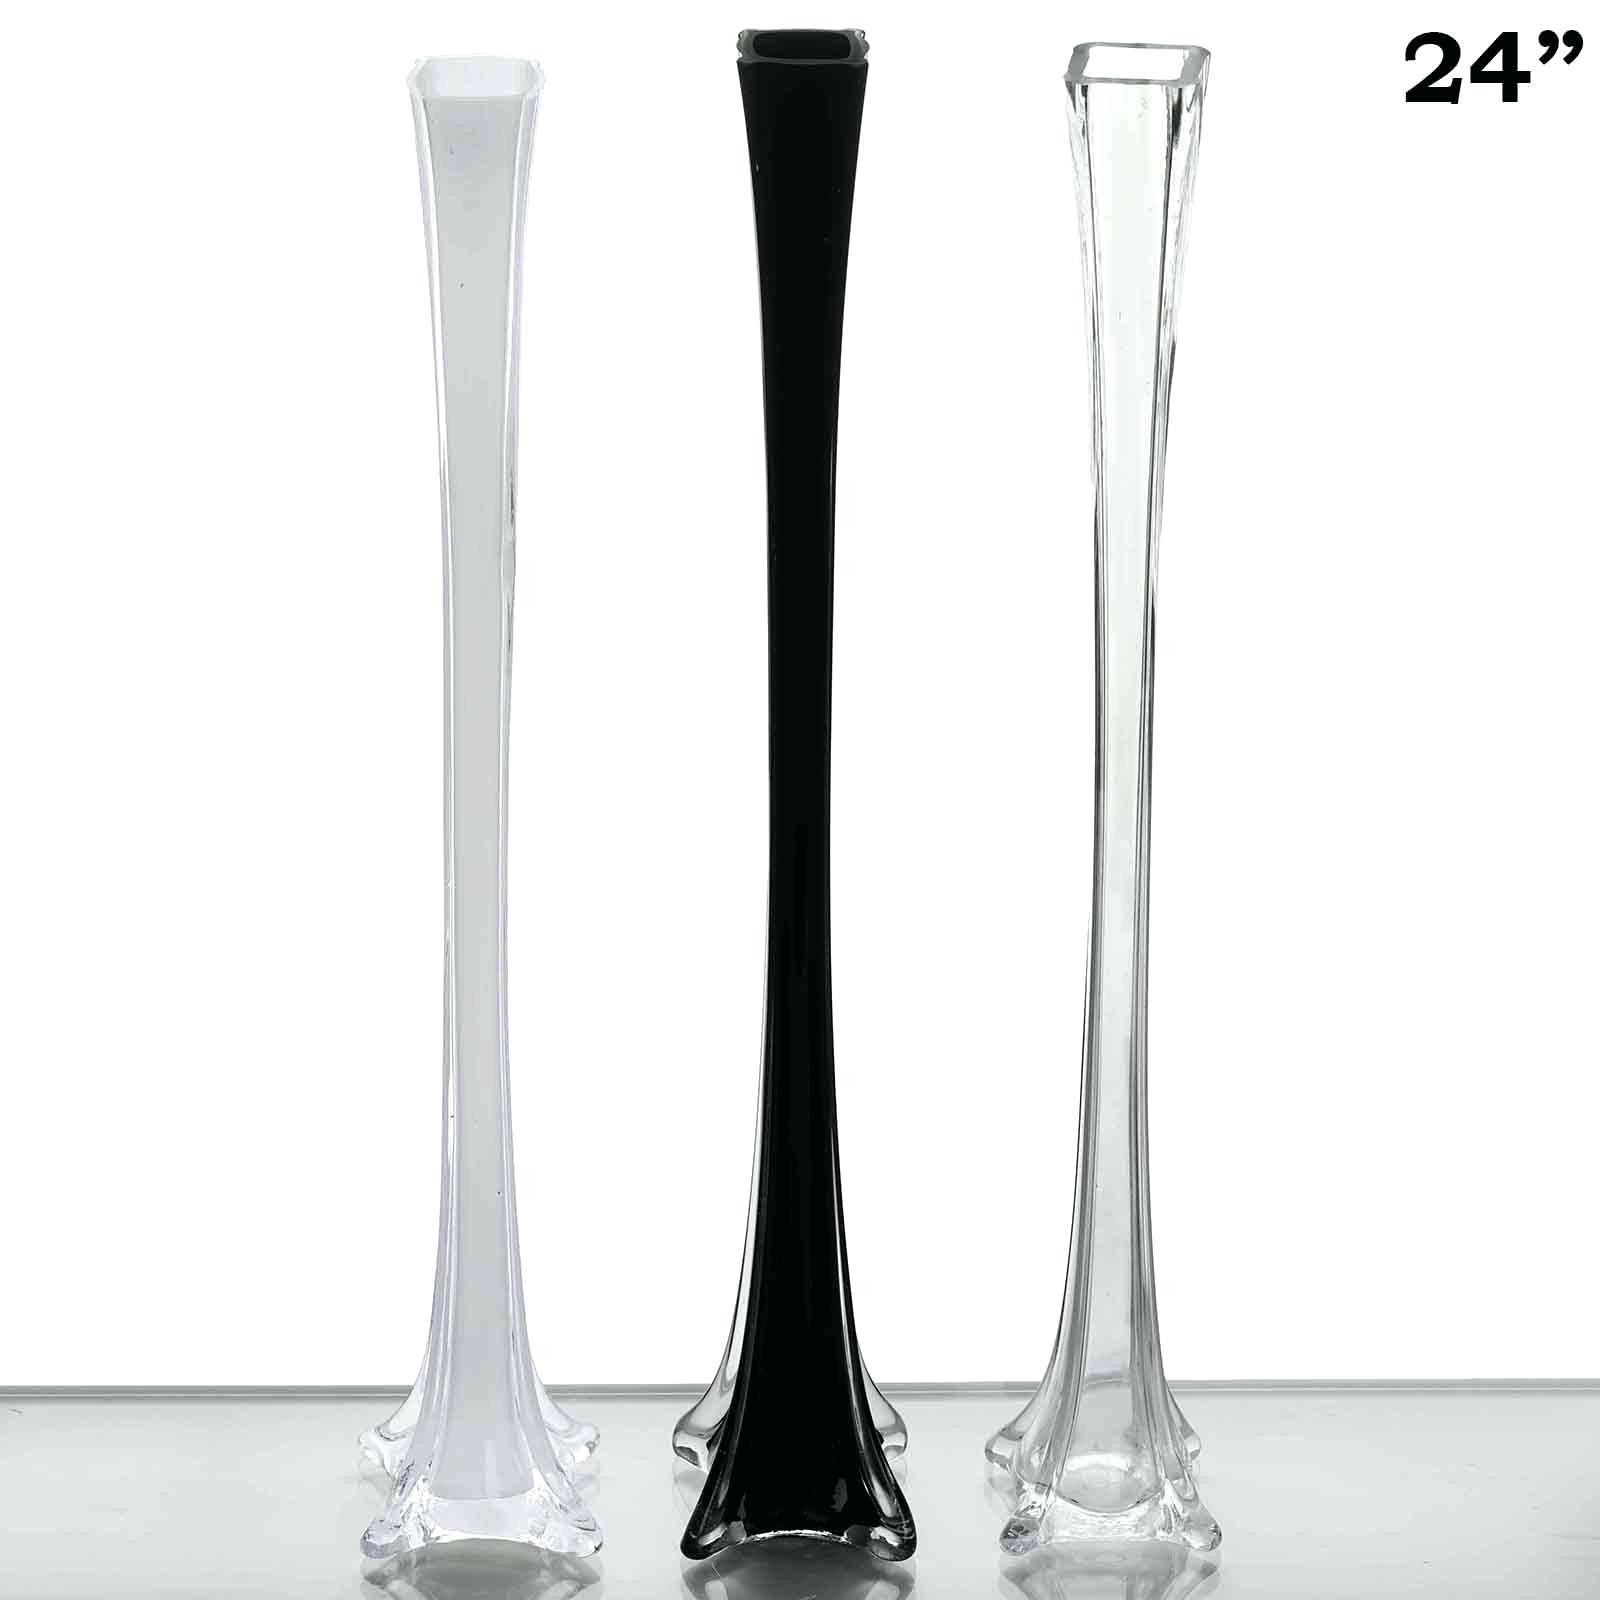 14 attractive Small Crystal Vases wholesale 2024 free download small crystal vases wholesale of glass vases with lids gallery living room glass vase fresh 2h vases throughout glass vases with lids images fantastic chair decor ideas from living room vase